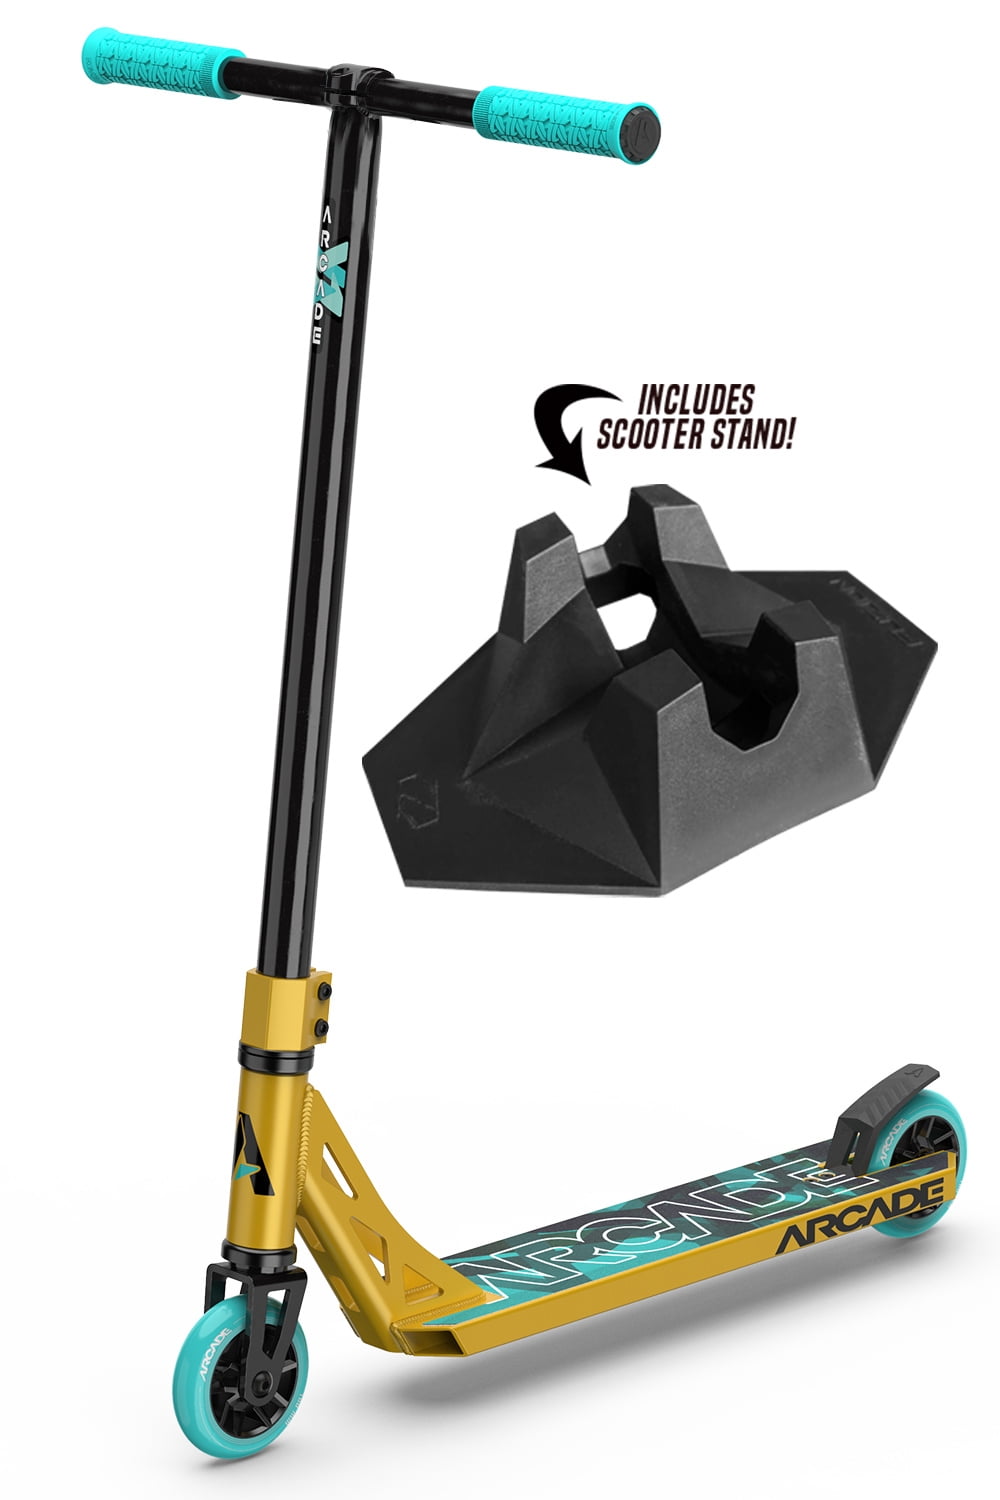 Microbe Krydret skrue Arcade Action Sports Defender Pro Scooters, Stunt Scooter For Kids 8 Years  And Up, 2 Piece Handlebar, Includes Scooter Stand! - Walmart.com